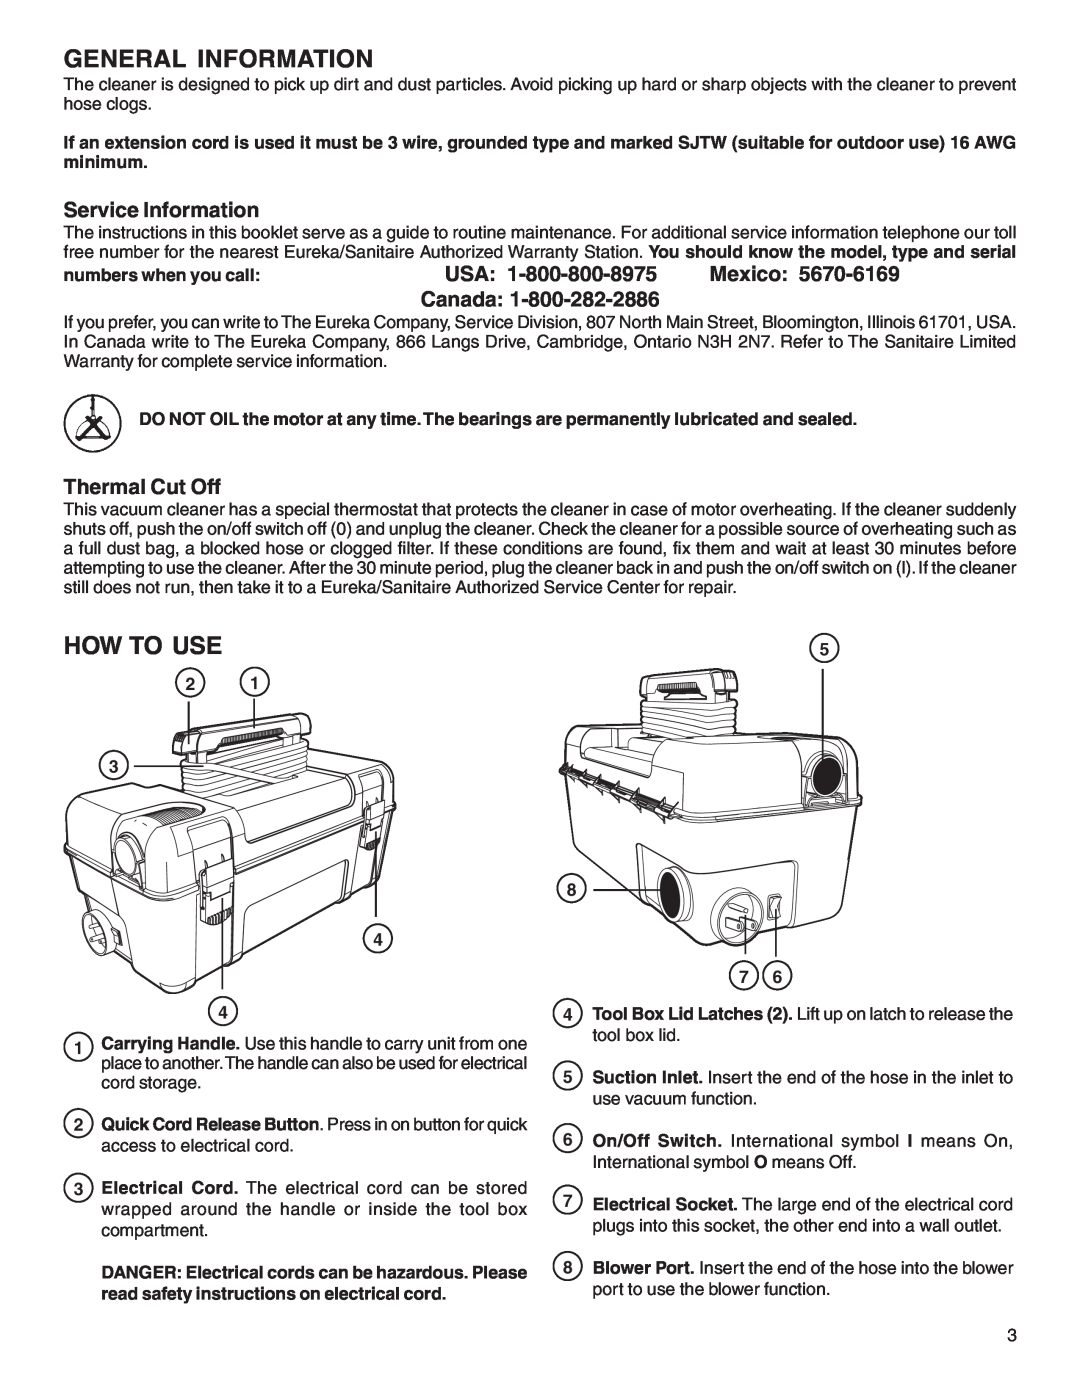 Sanitaire 1040 warranty General Information, How To Use, Service Information, Usa, Mexico, Canada, Thermal Cut Off 